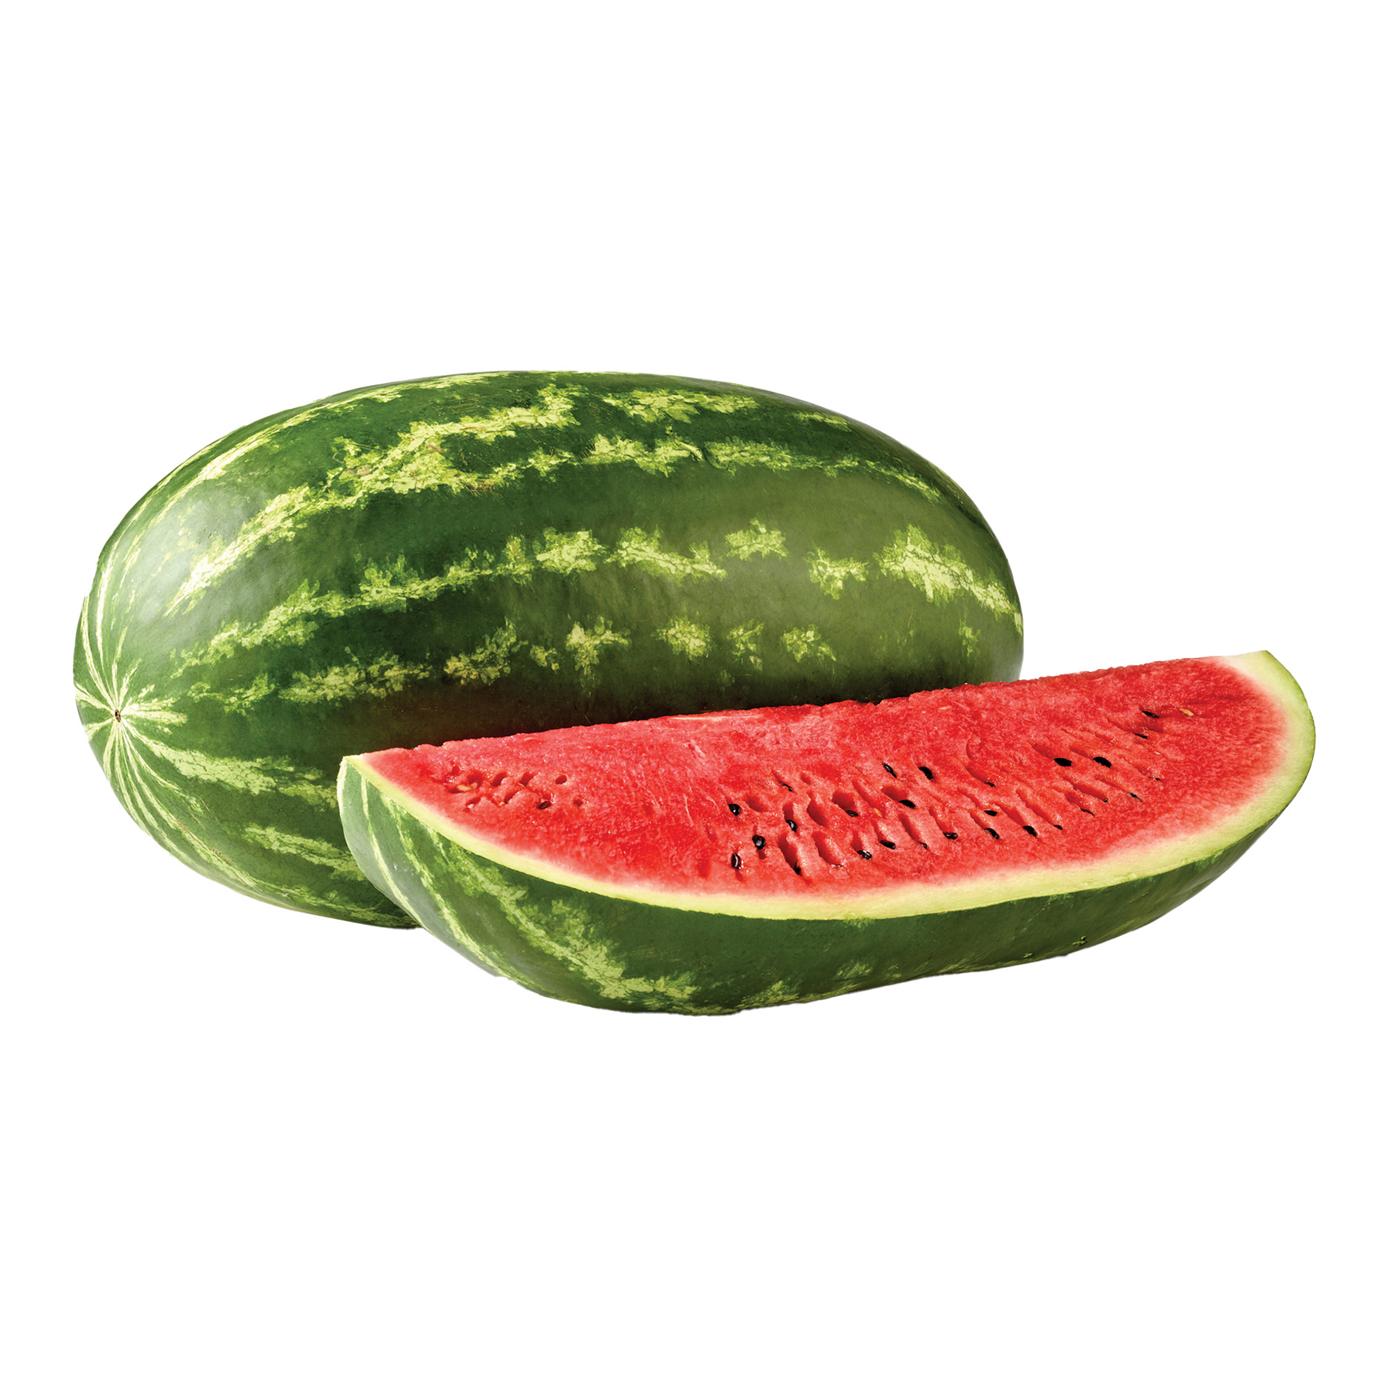 Fresh Super-Sized Seeded Watermelon; image 1 of 2